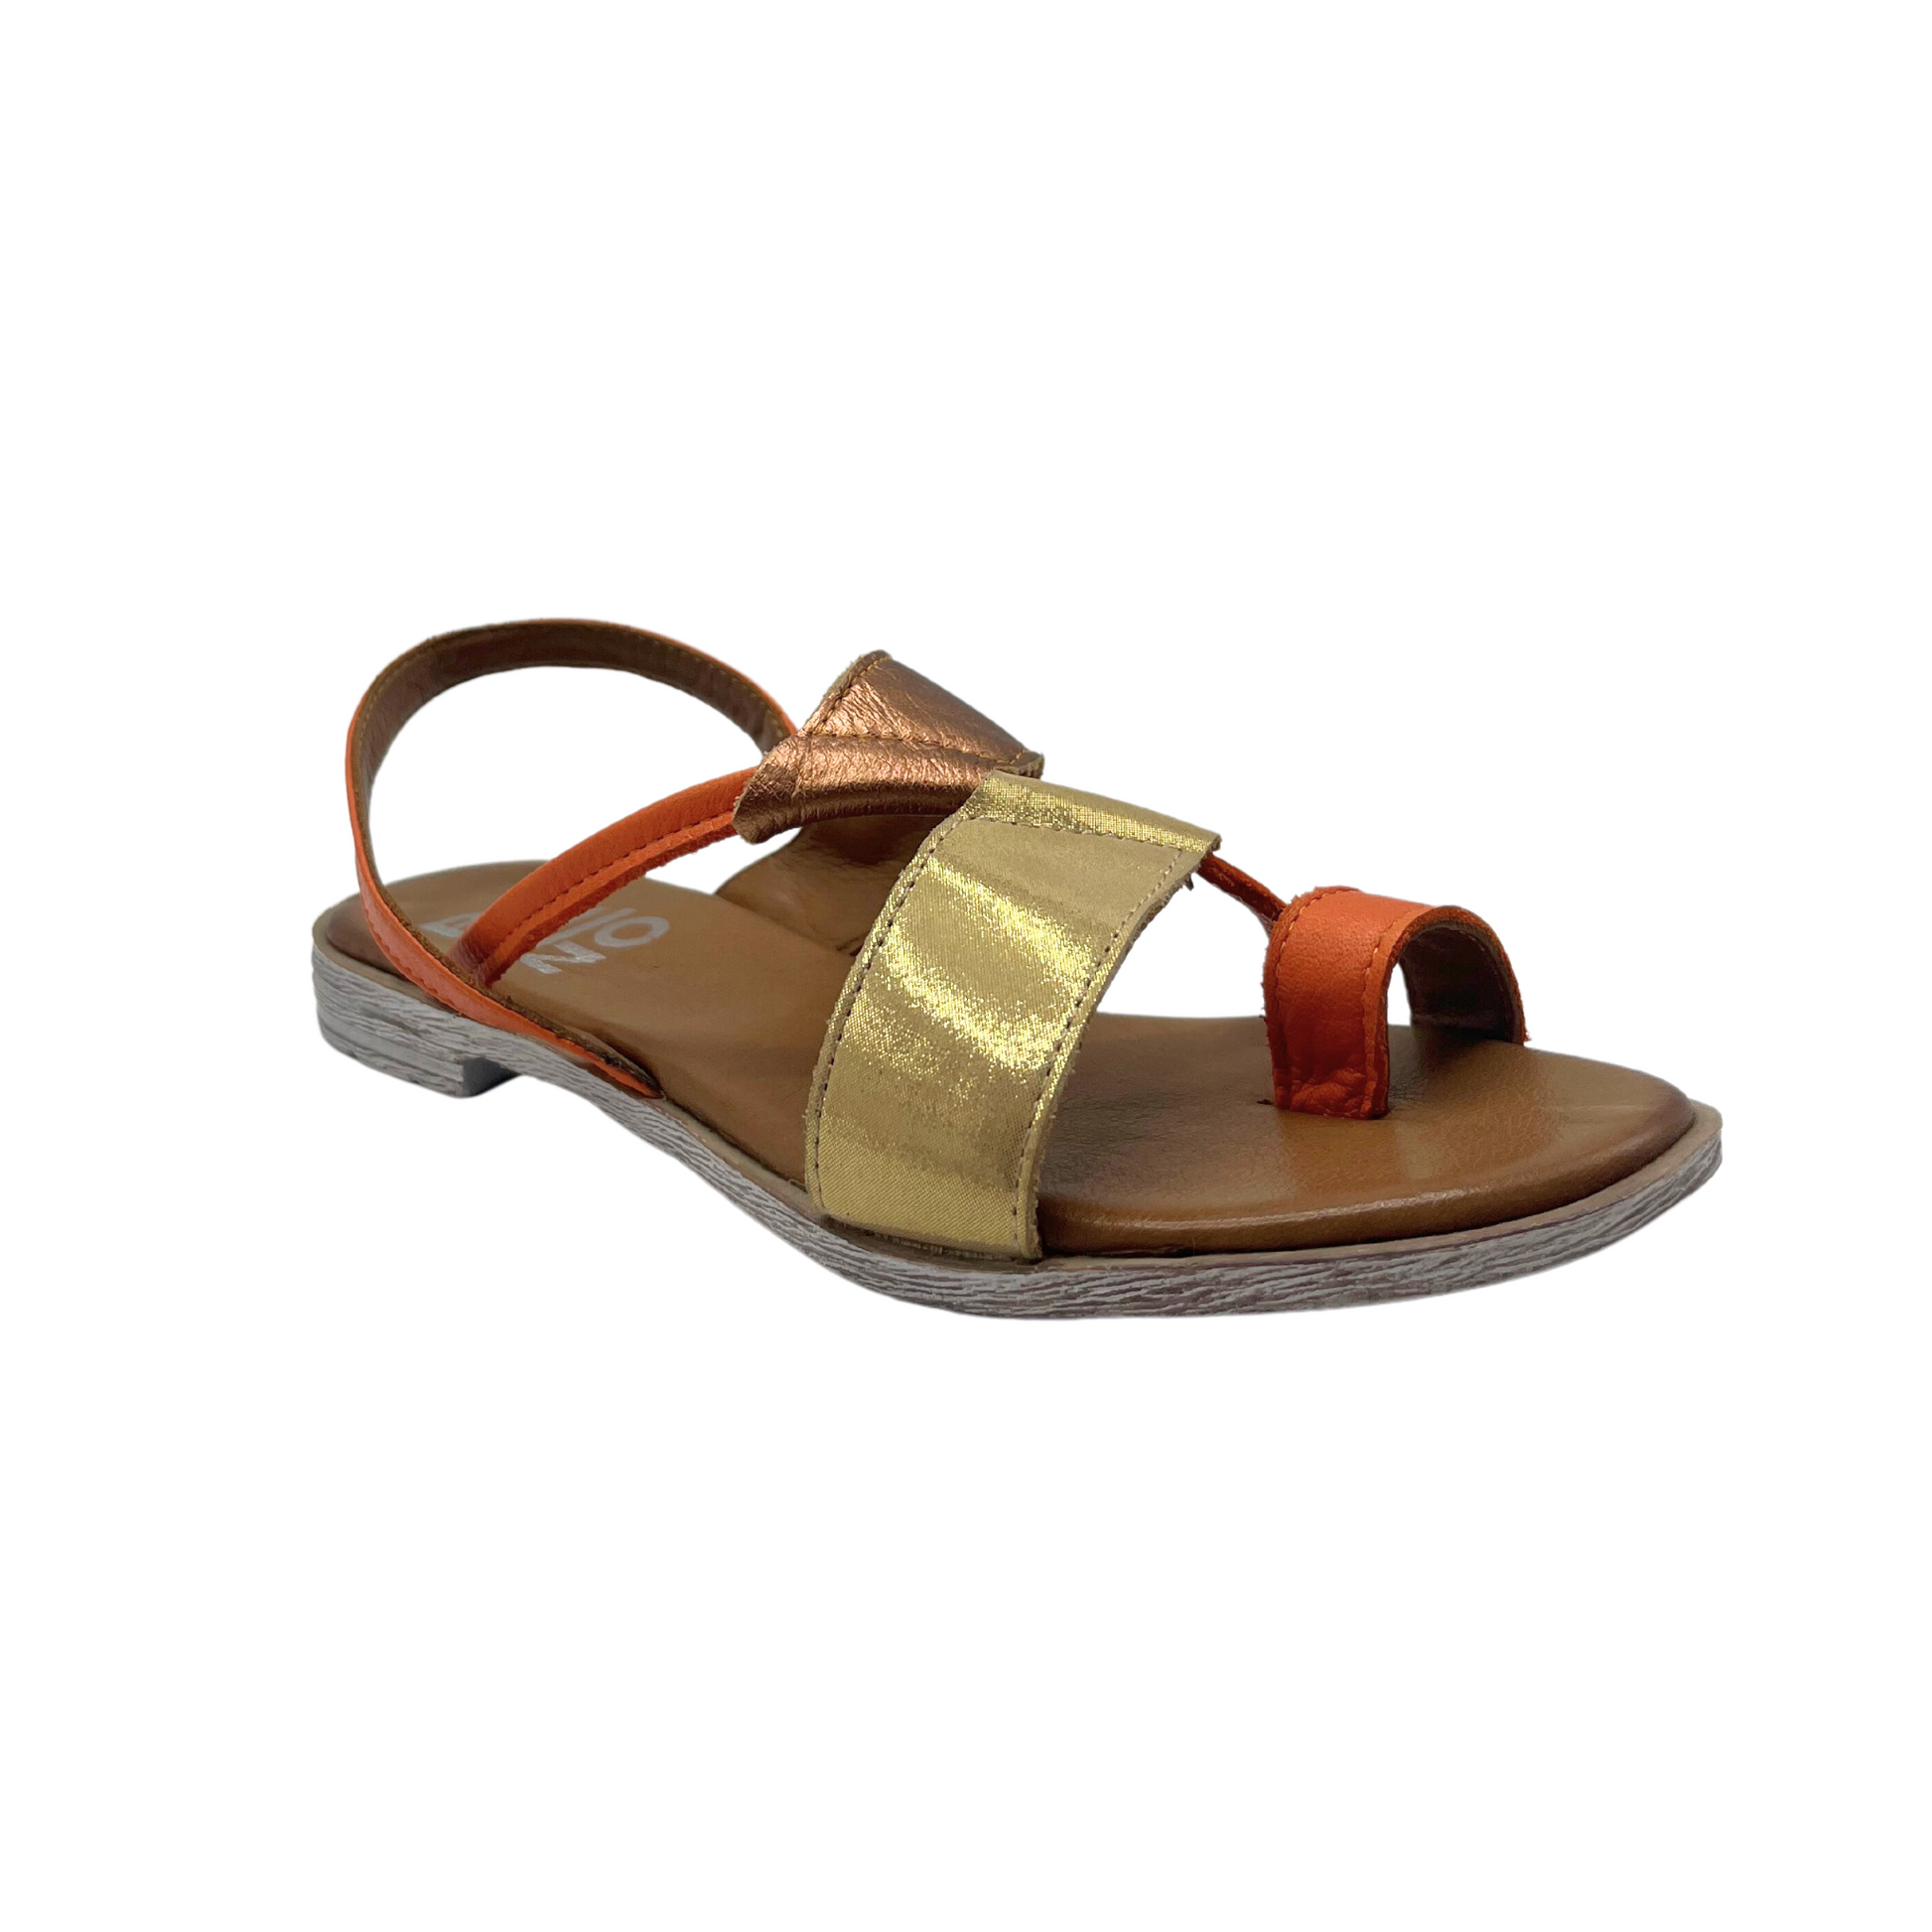 Angled side view of a flat sandal in a combo of leather colors - gold, orange and rose gold.  Toe loop at front and heel strap around the back